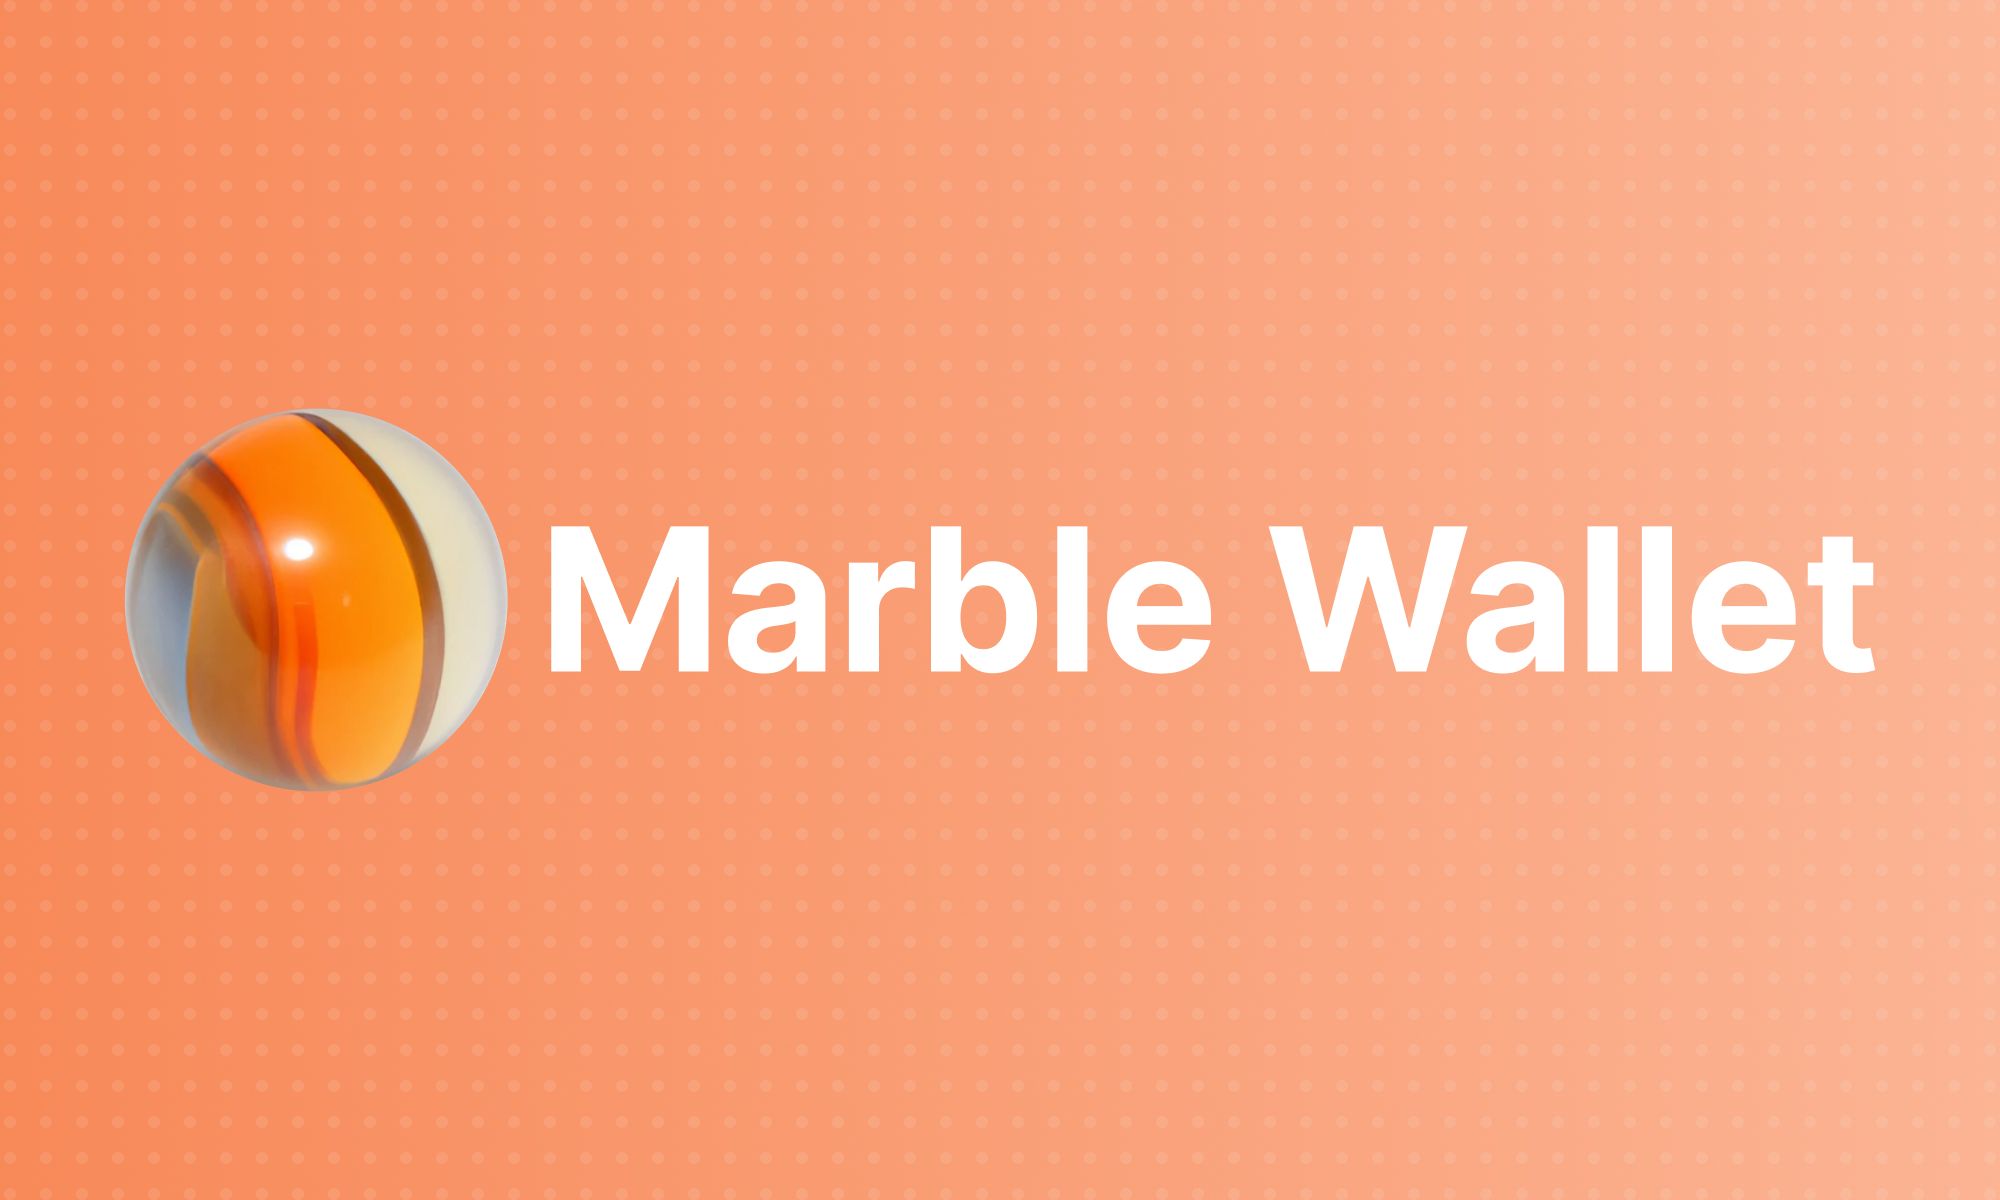 What is Marble Wallet?